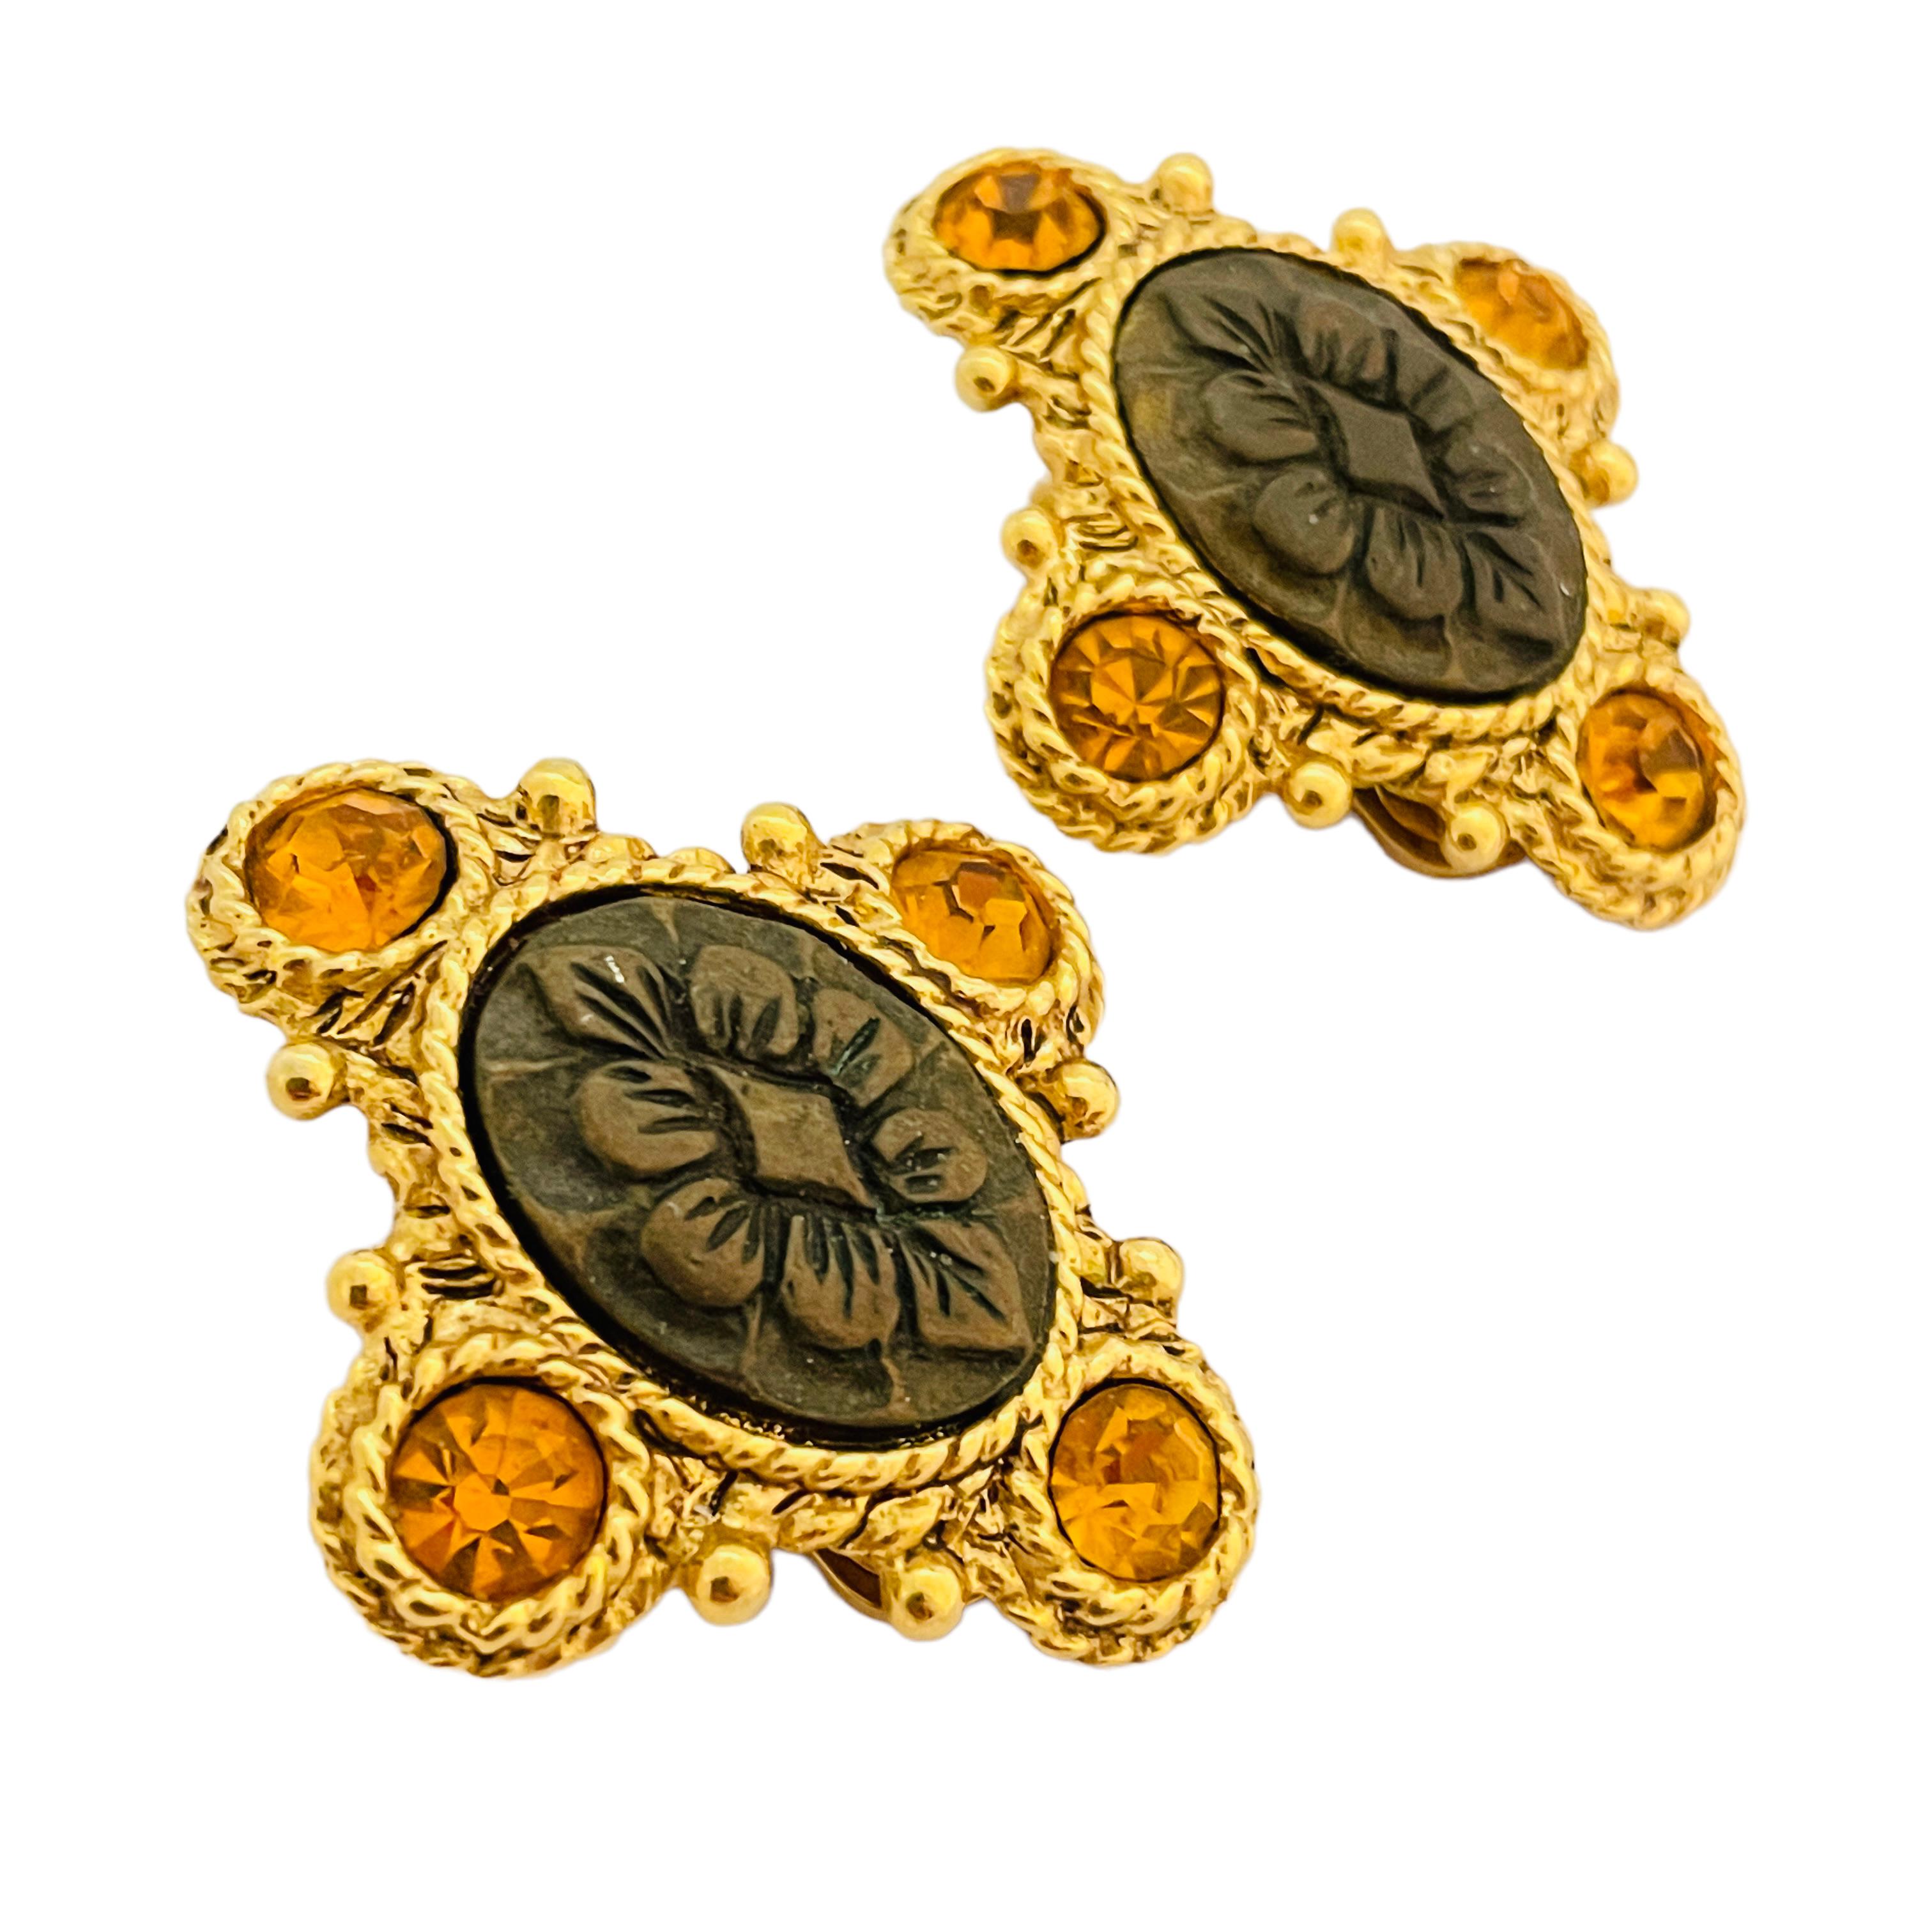 DETAILS

• unsigned

• gold tone with glass

• vintage designer clip on earrings

MEASUREMENTS

• 1.63